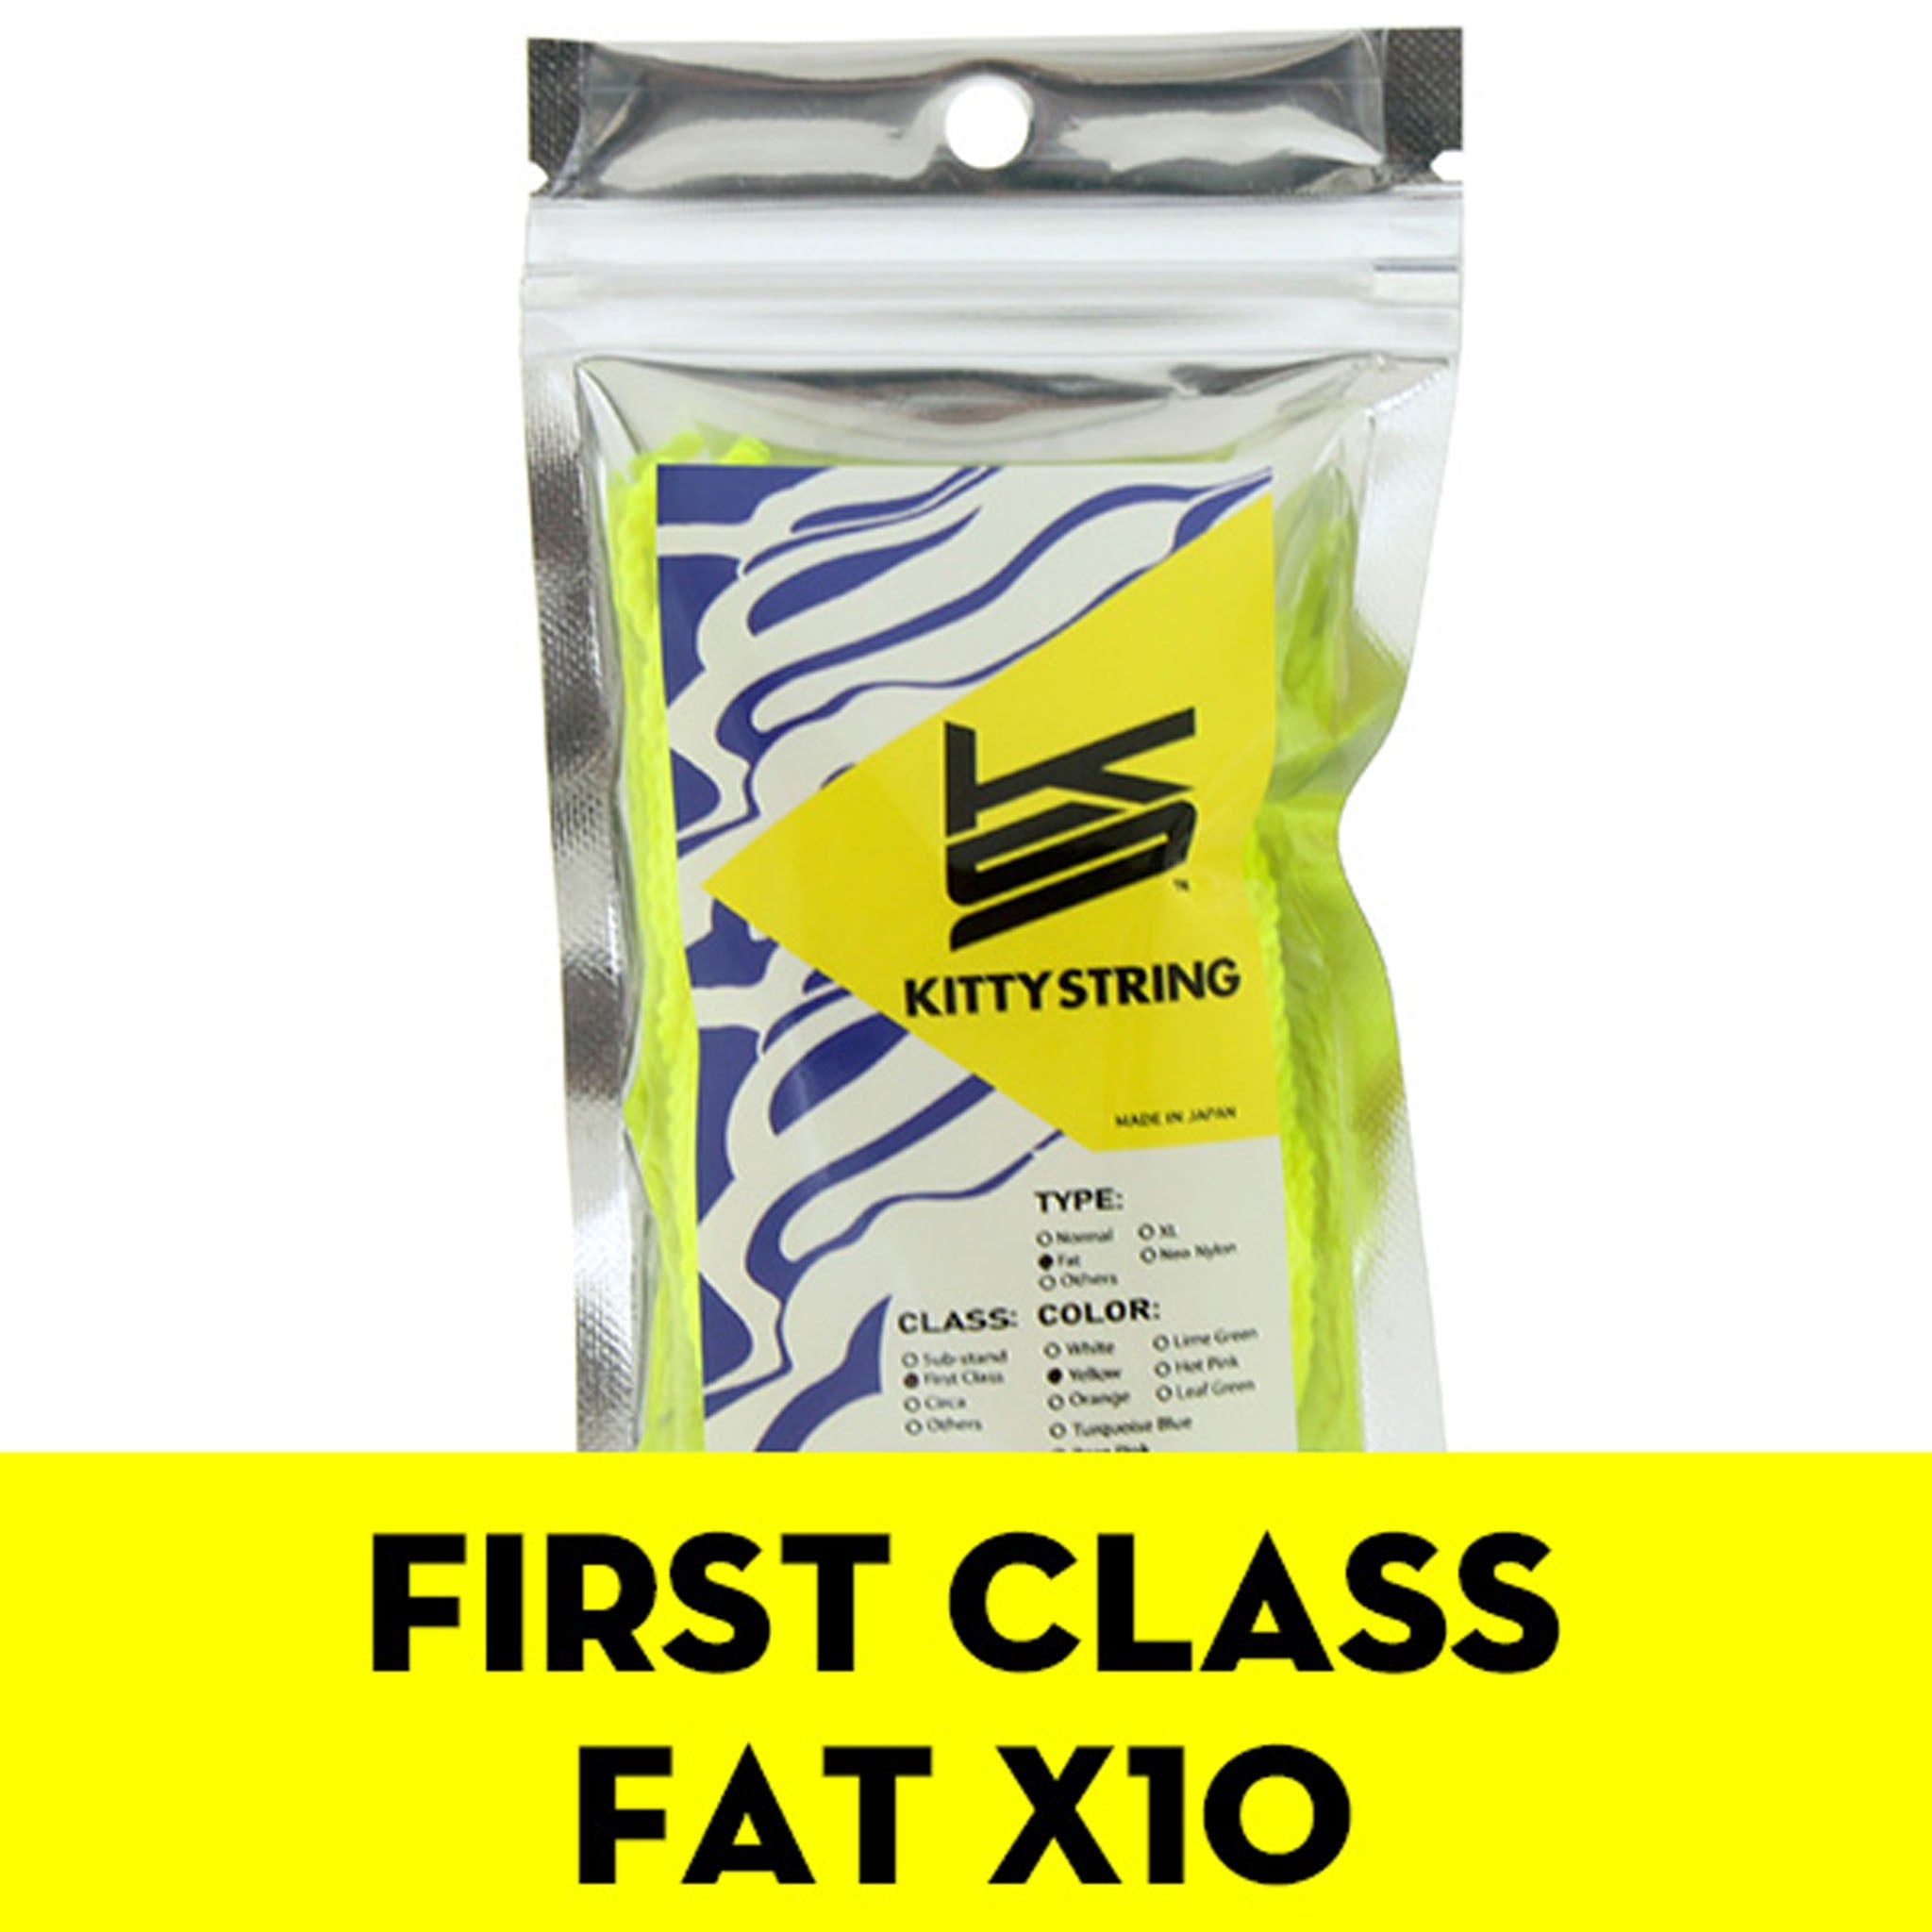 Kitty String (Poly100%) "First-Class" Fat x10